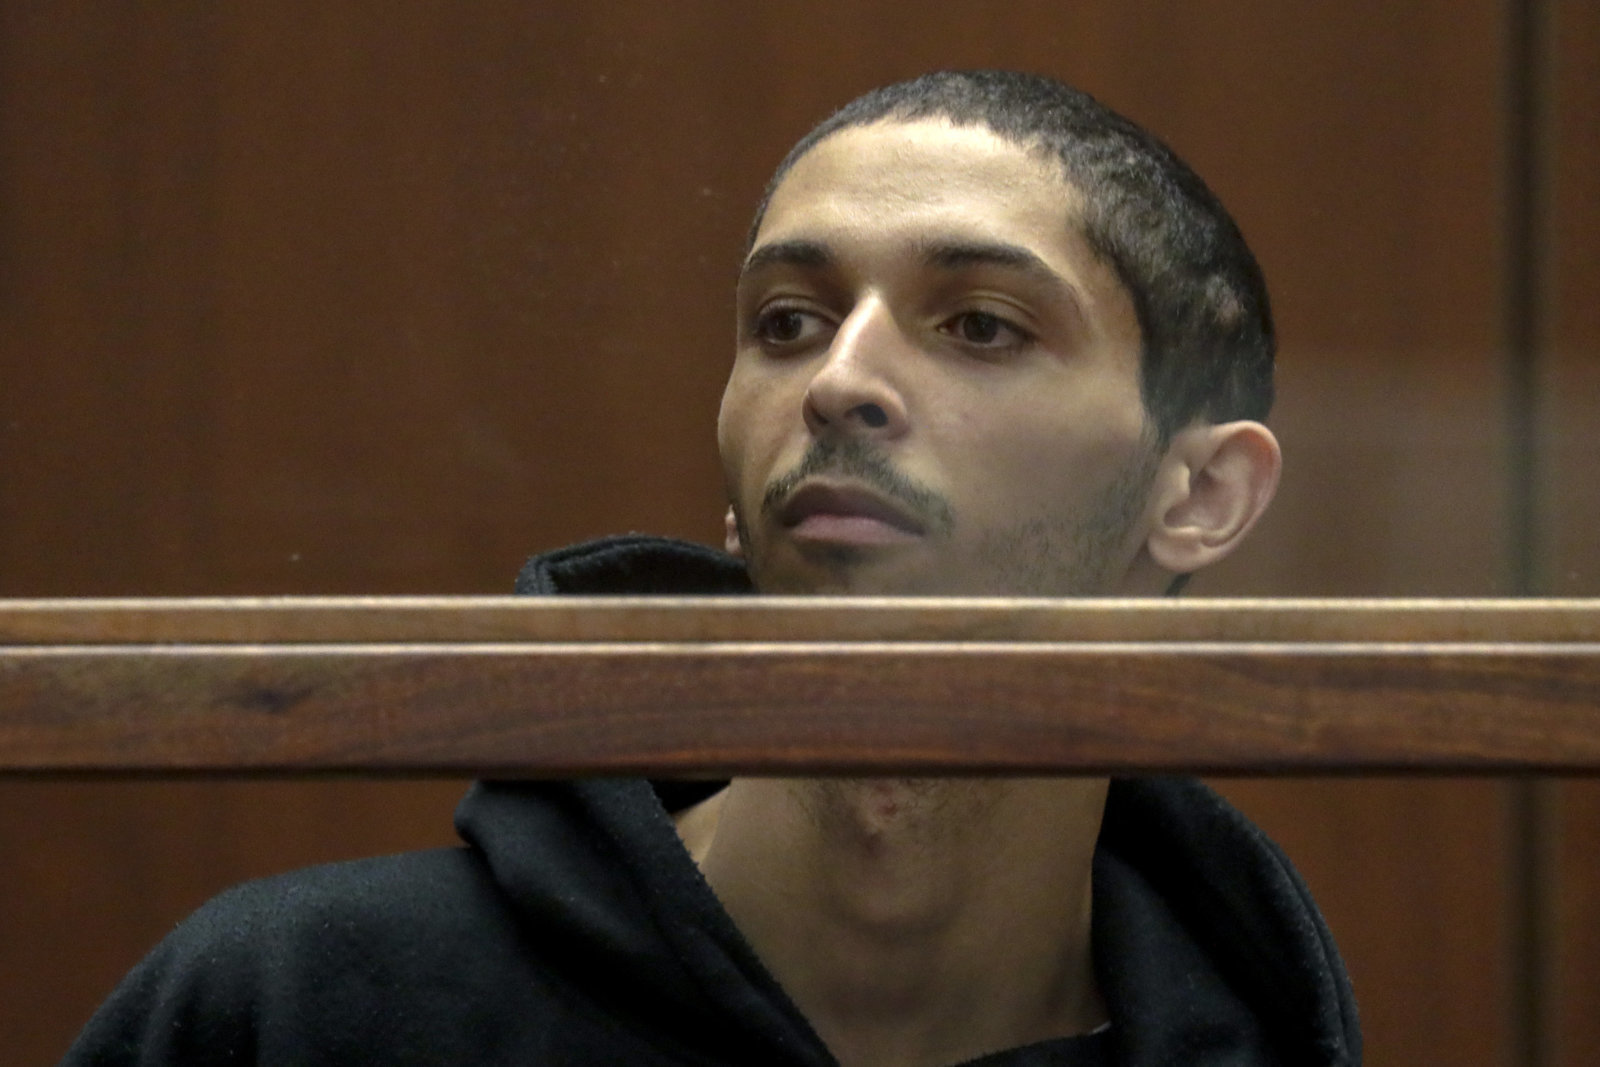 notorious call of duty swatter tyler barriss to serve 20 years in prison